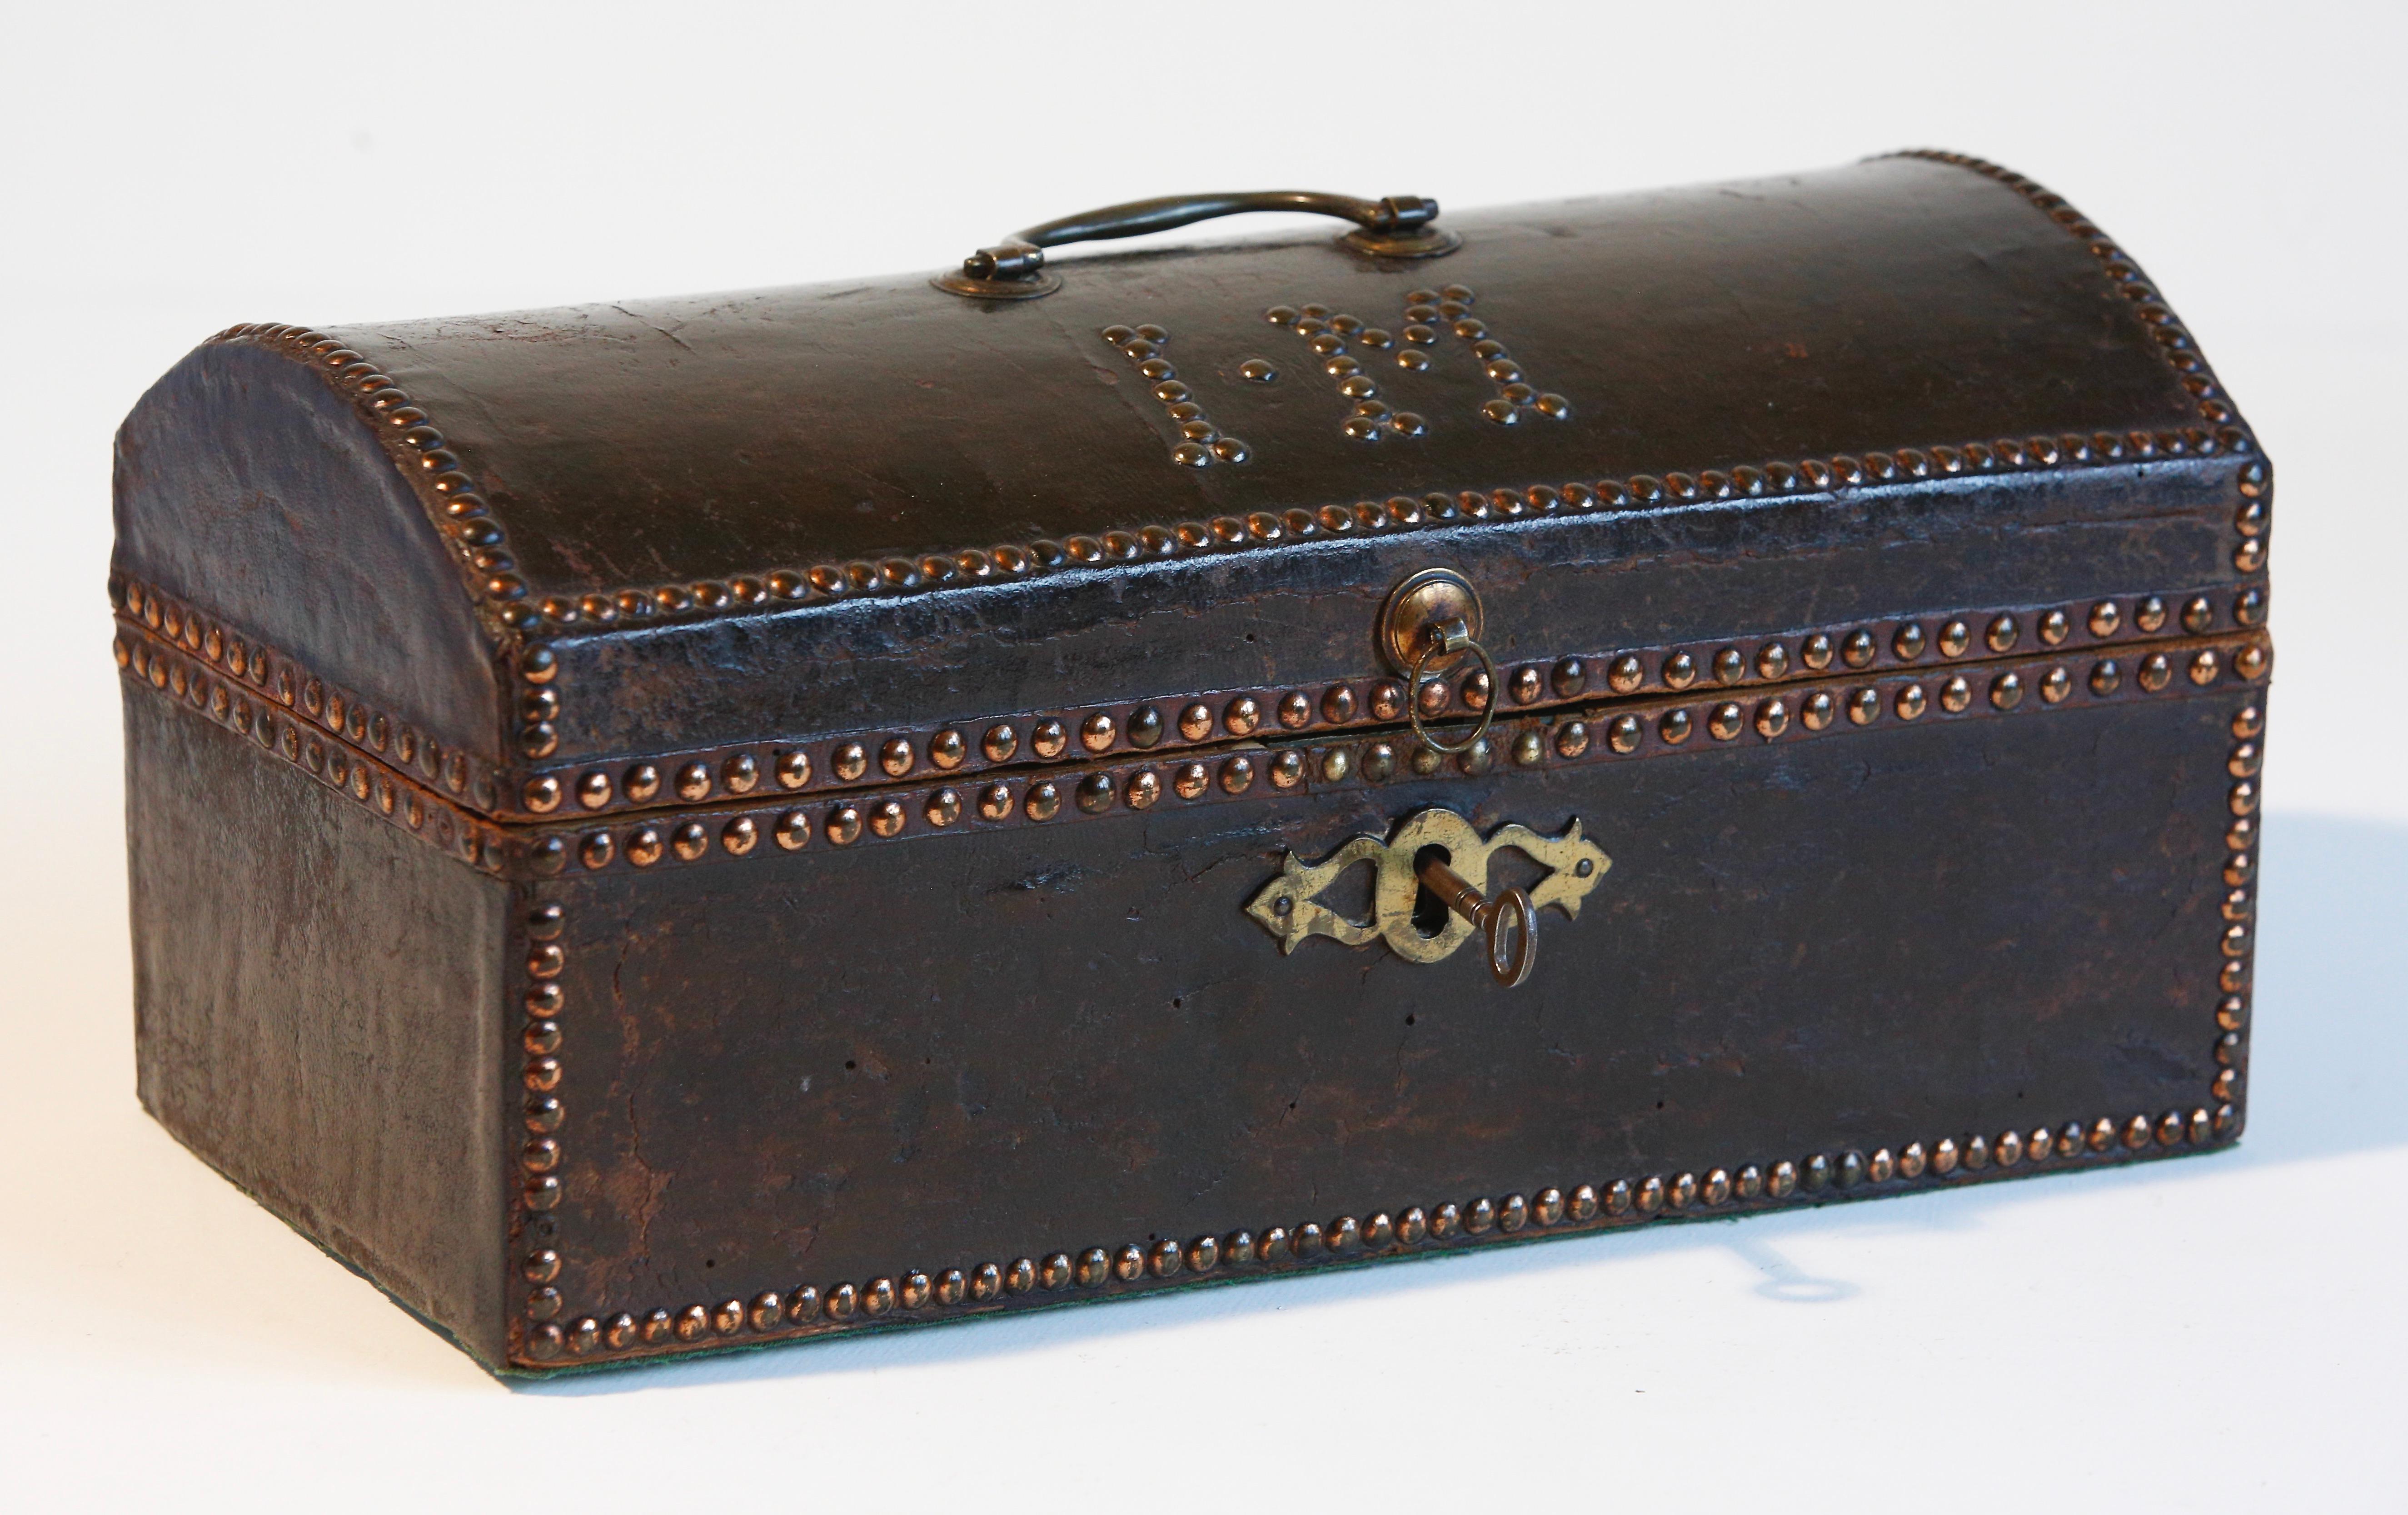 British Regency Leather Studded Campaign Case Trunk by Chapple & Sons Initials 